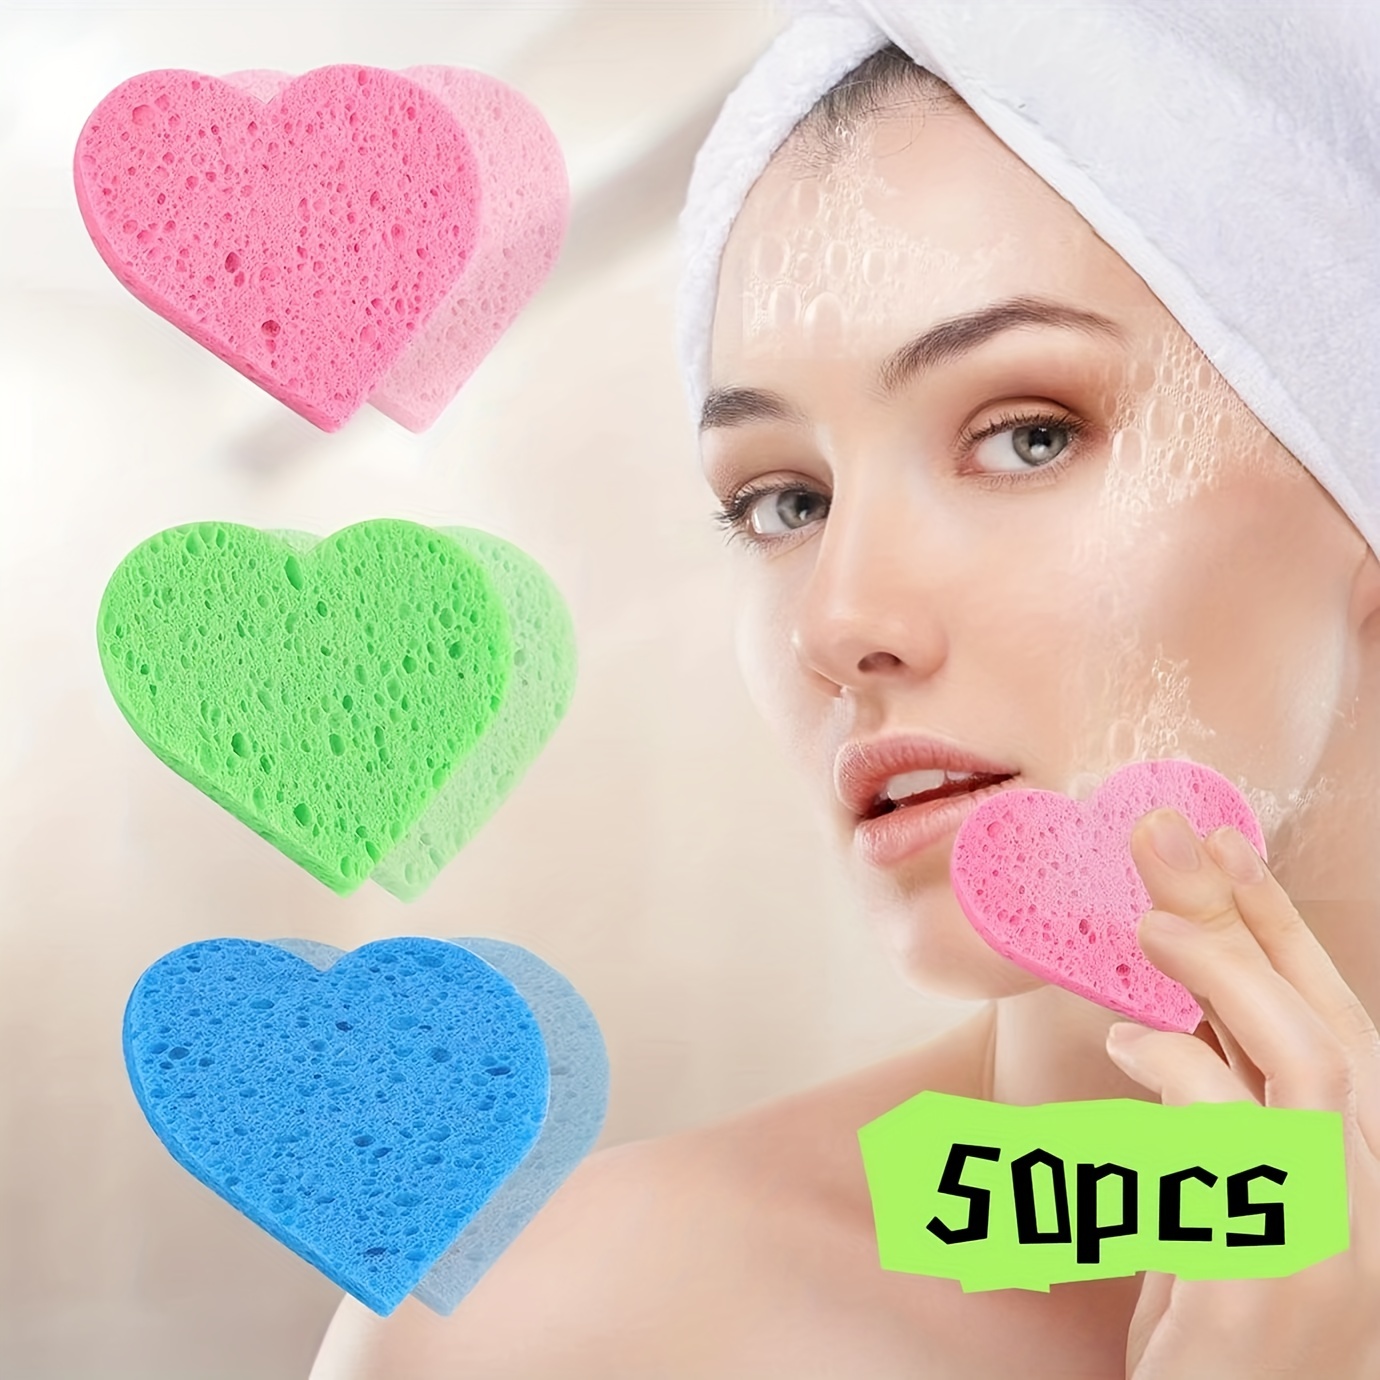 50-Count Heart Shape Compressed Facial Sponges, 100% Natural Cosmetic Spa  Sponges for Facial Cleansing for Daily Facial Cleansing, Exfoliating Mask